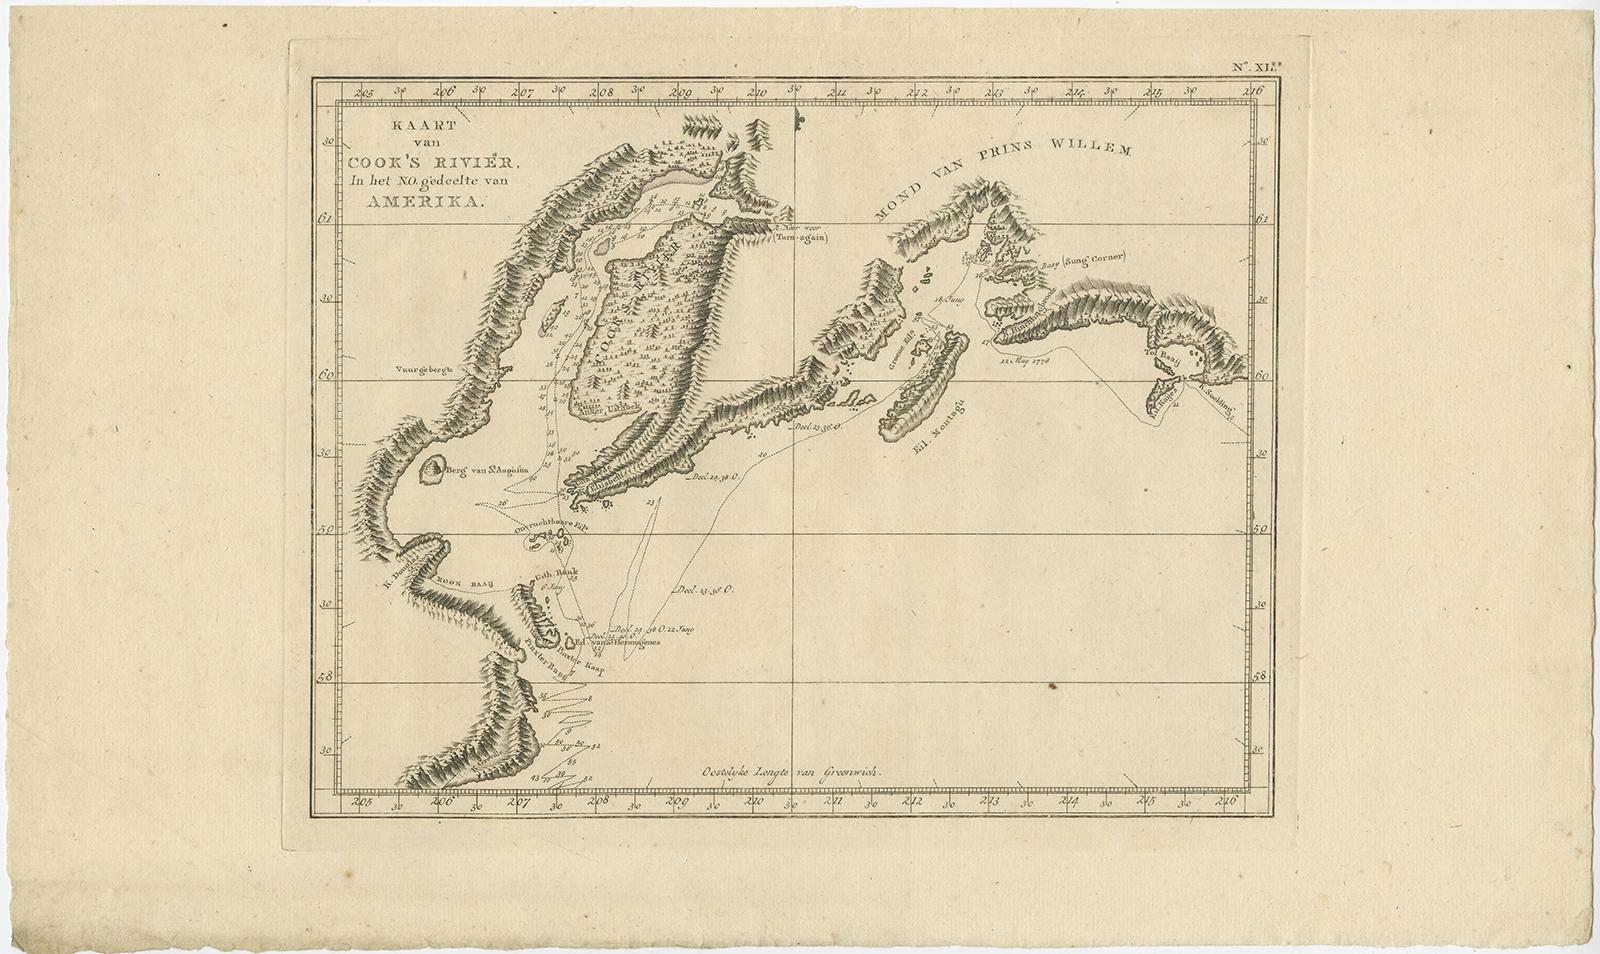 Antique map titled 'Kaart van Cook's Rivier in het N.O. gedeelte van Amerika'. 

Chart showing the region between Cape Grenville and Cape Suckling, including Whitsuntide Bay, Cape Whitsunday, Smokey Bay, Cape Douglas, Mount St. Augustine, Volcano